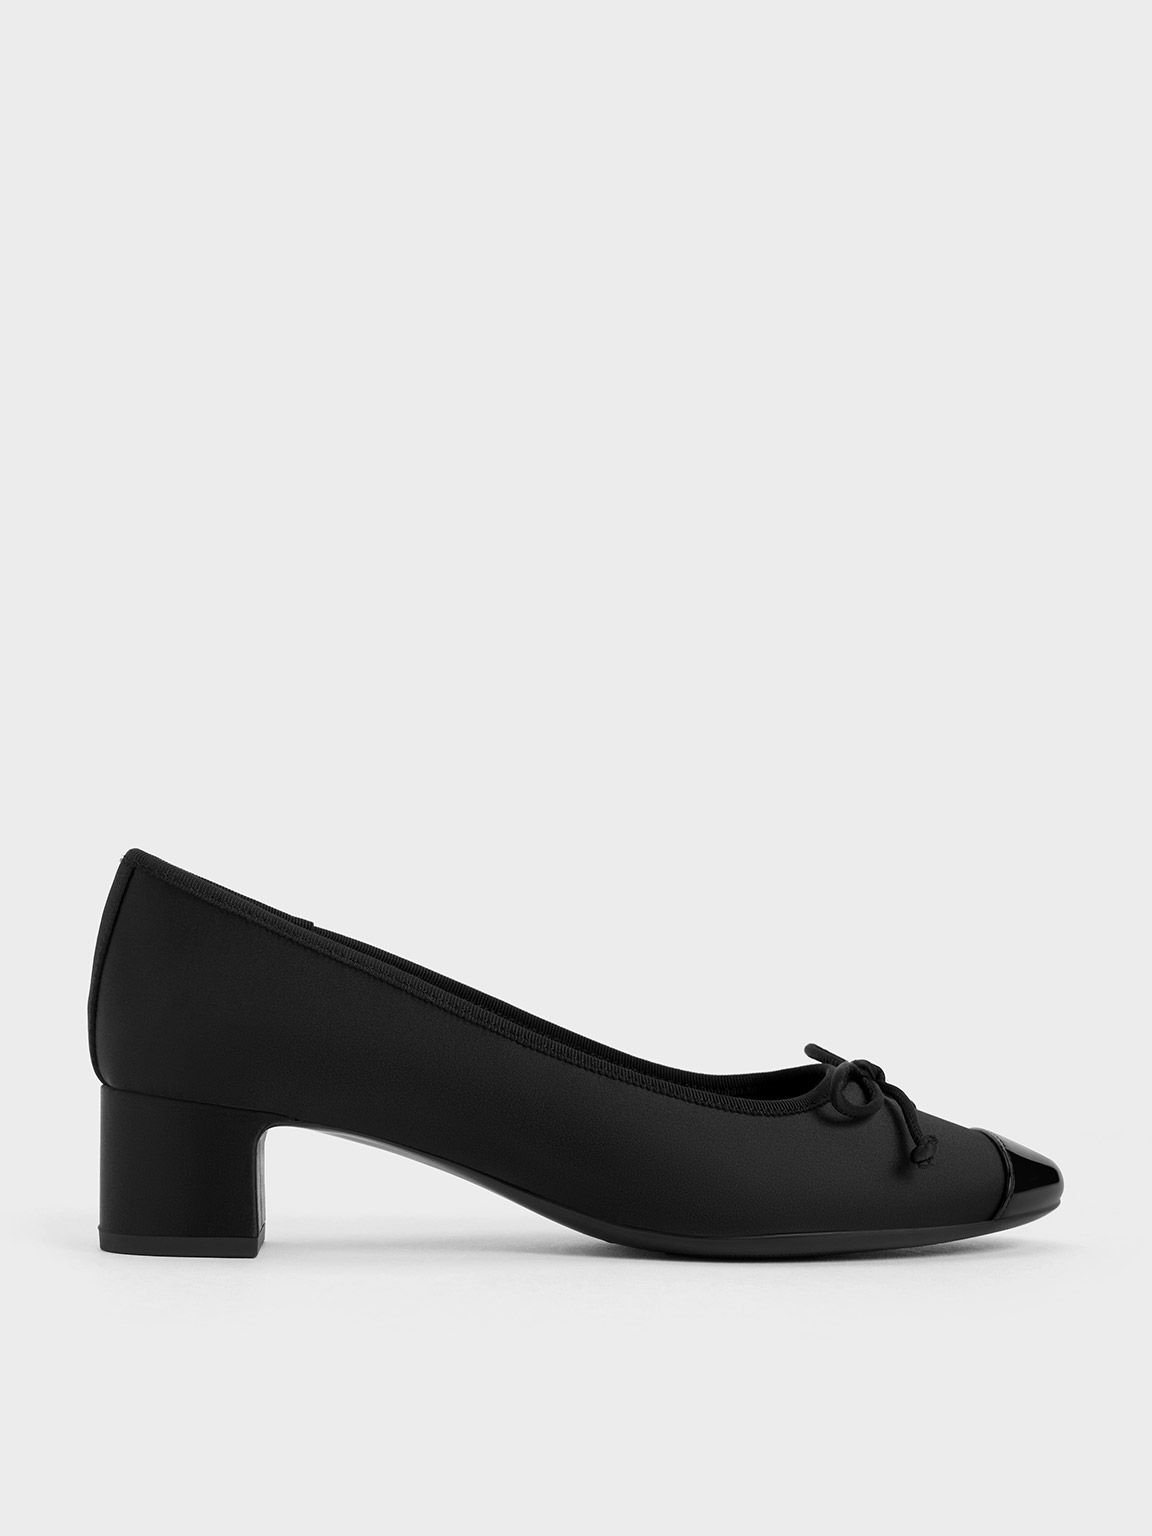 Recycled Polyester Bow Ballet Pumps